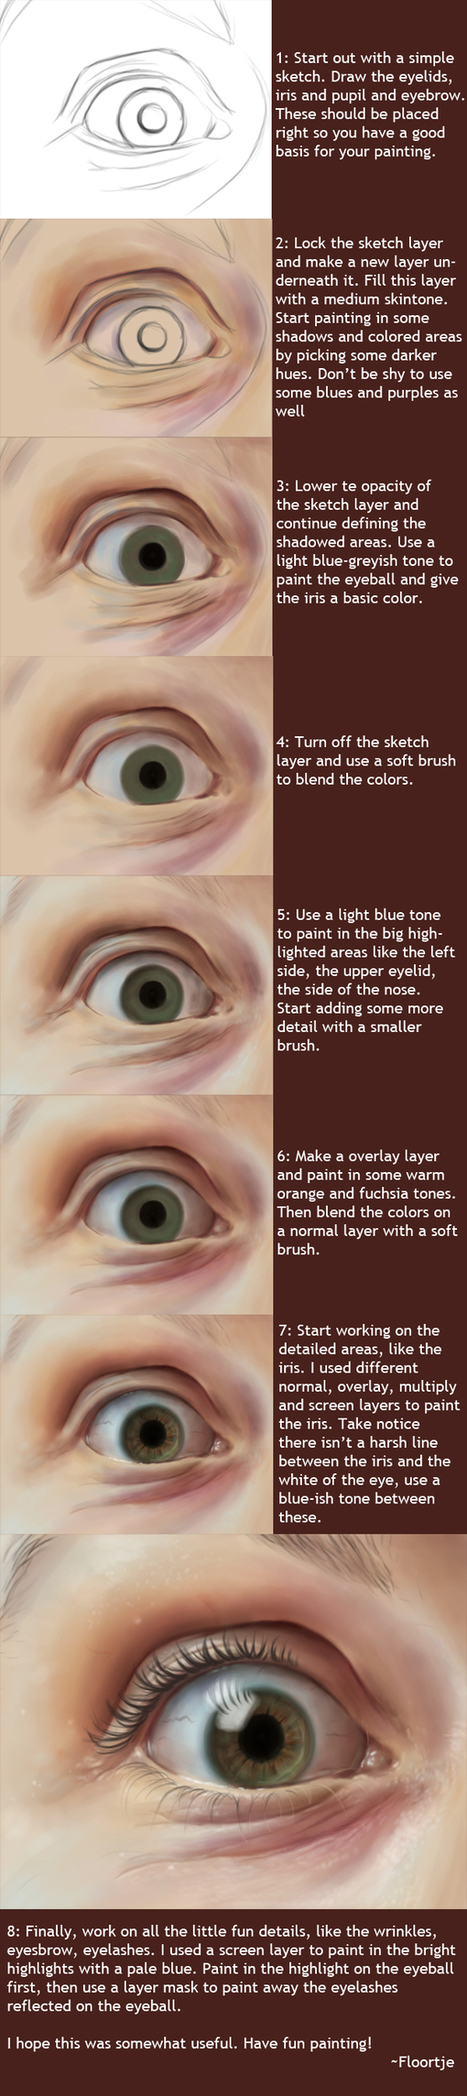 Eye Tutorial What the heck | Drawing and Painting Tutorials | Scoop.it